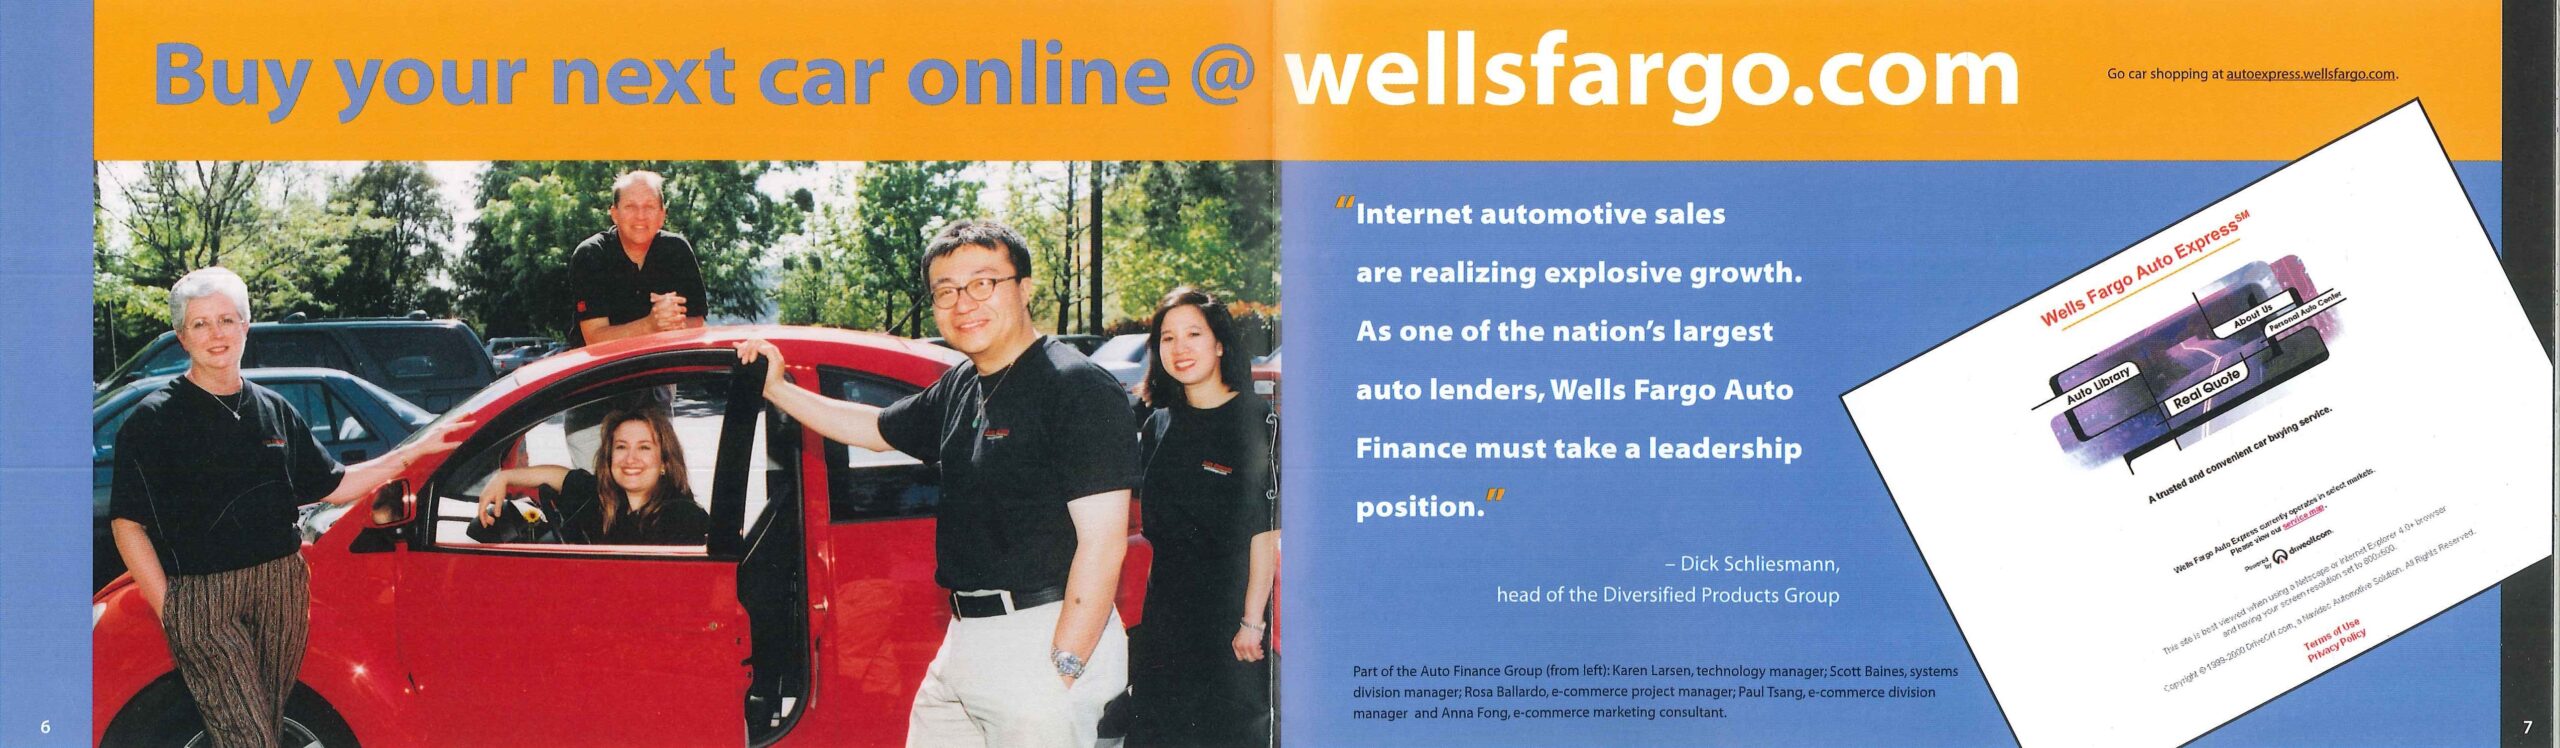 An advertisement with an image of five people in black shirts standing around a red car. An orange banner at the top reads: Buy your next car online @ wellsfargo.com.